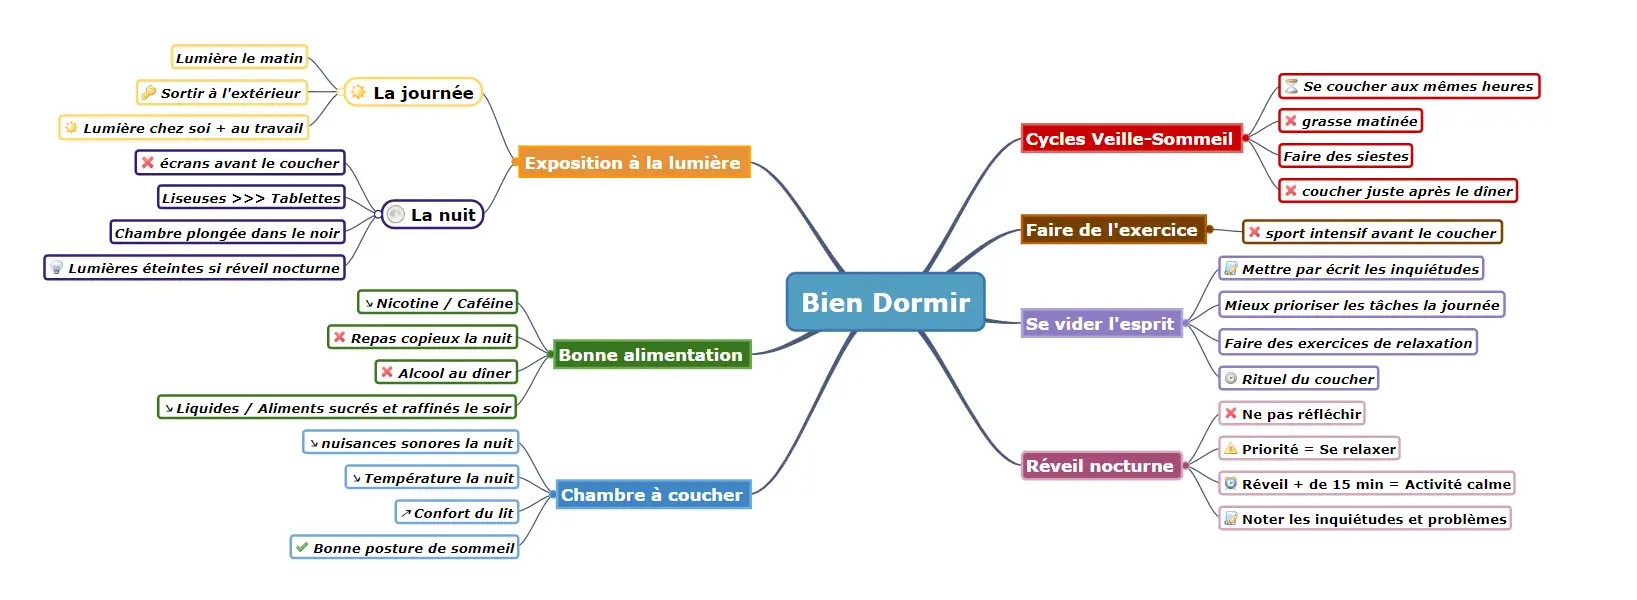 Exemple de mind mapping